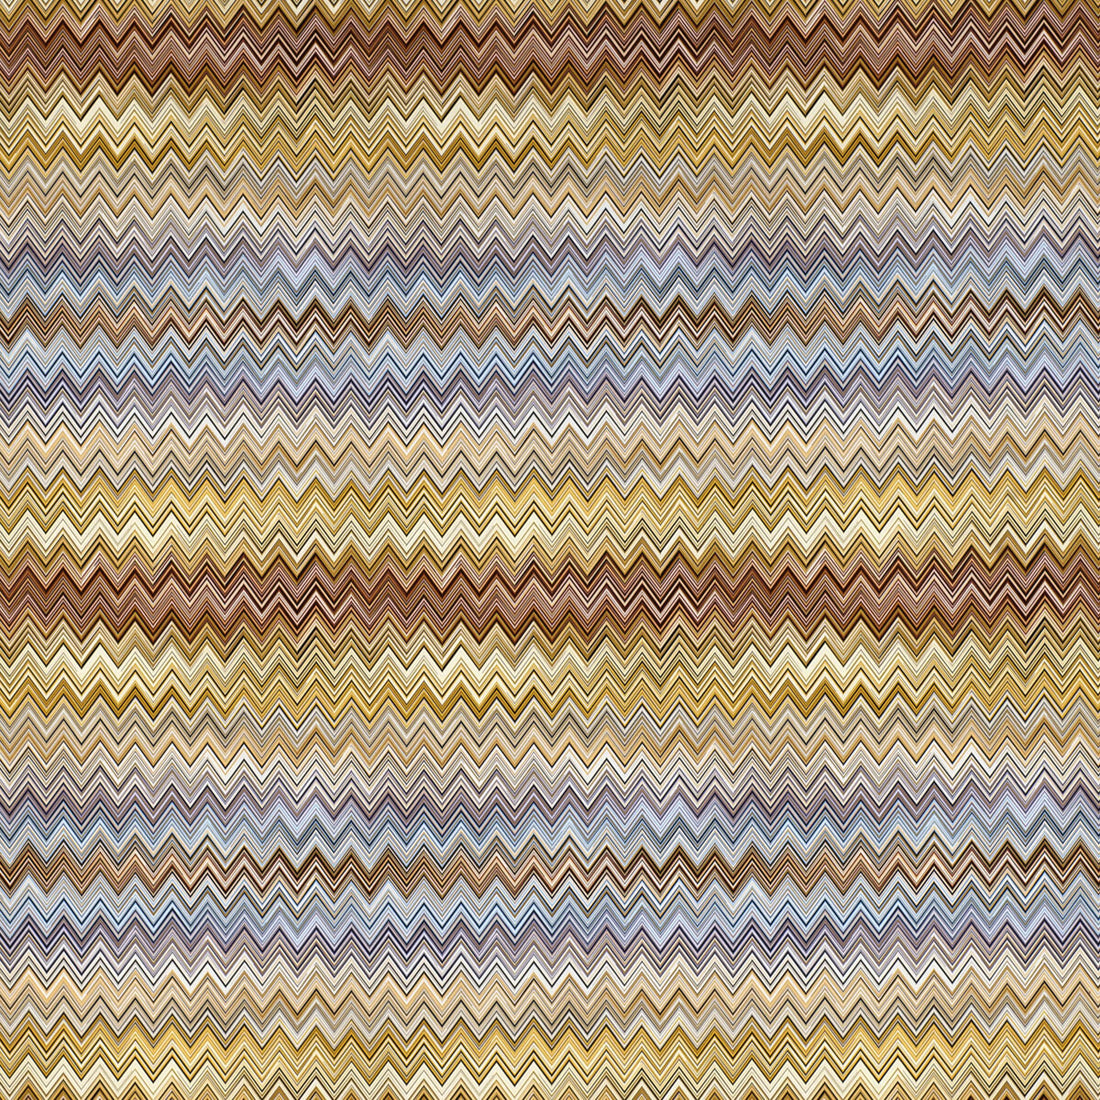 Jarris fabric in 148 color - pattern 36162.614.0 - by Kravet Couture in the Missoni Home collection